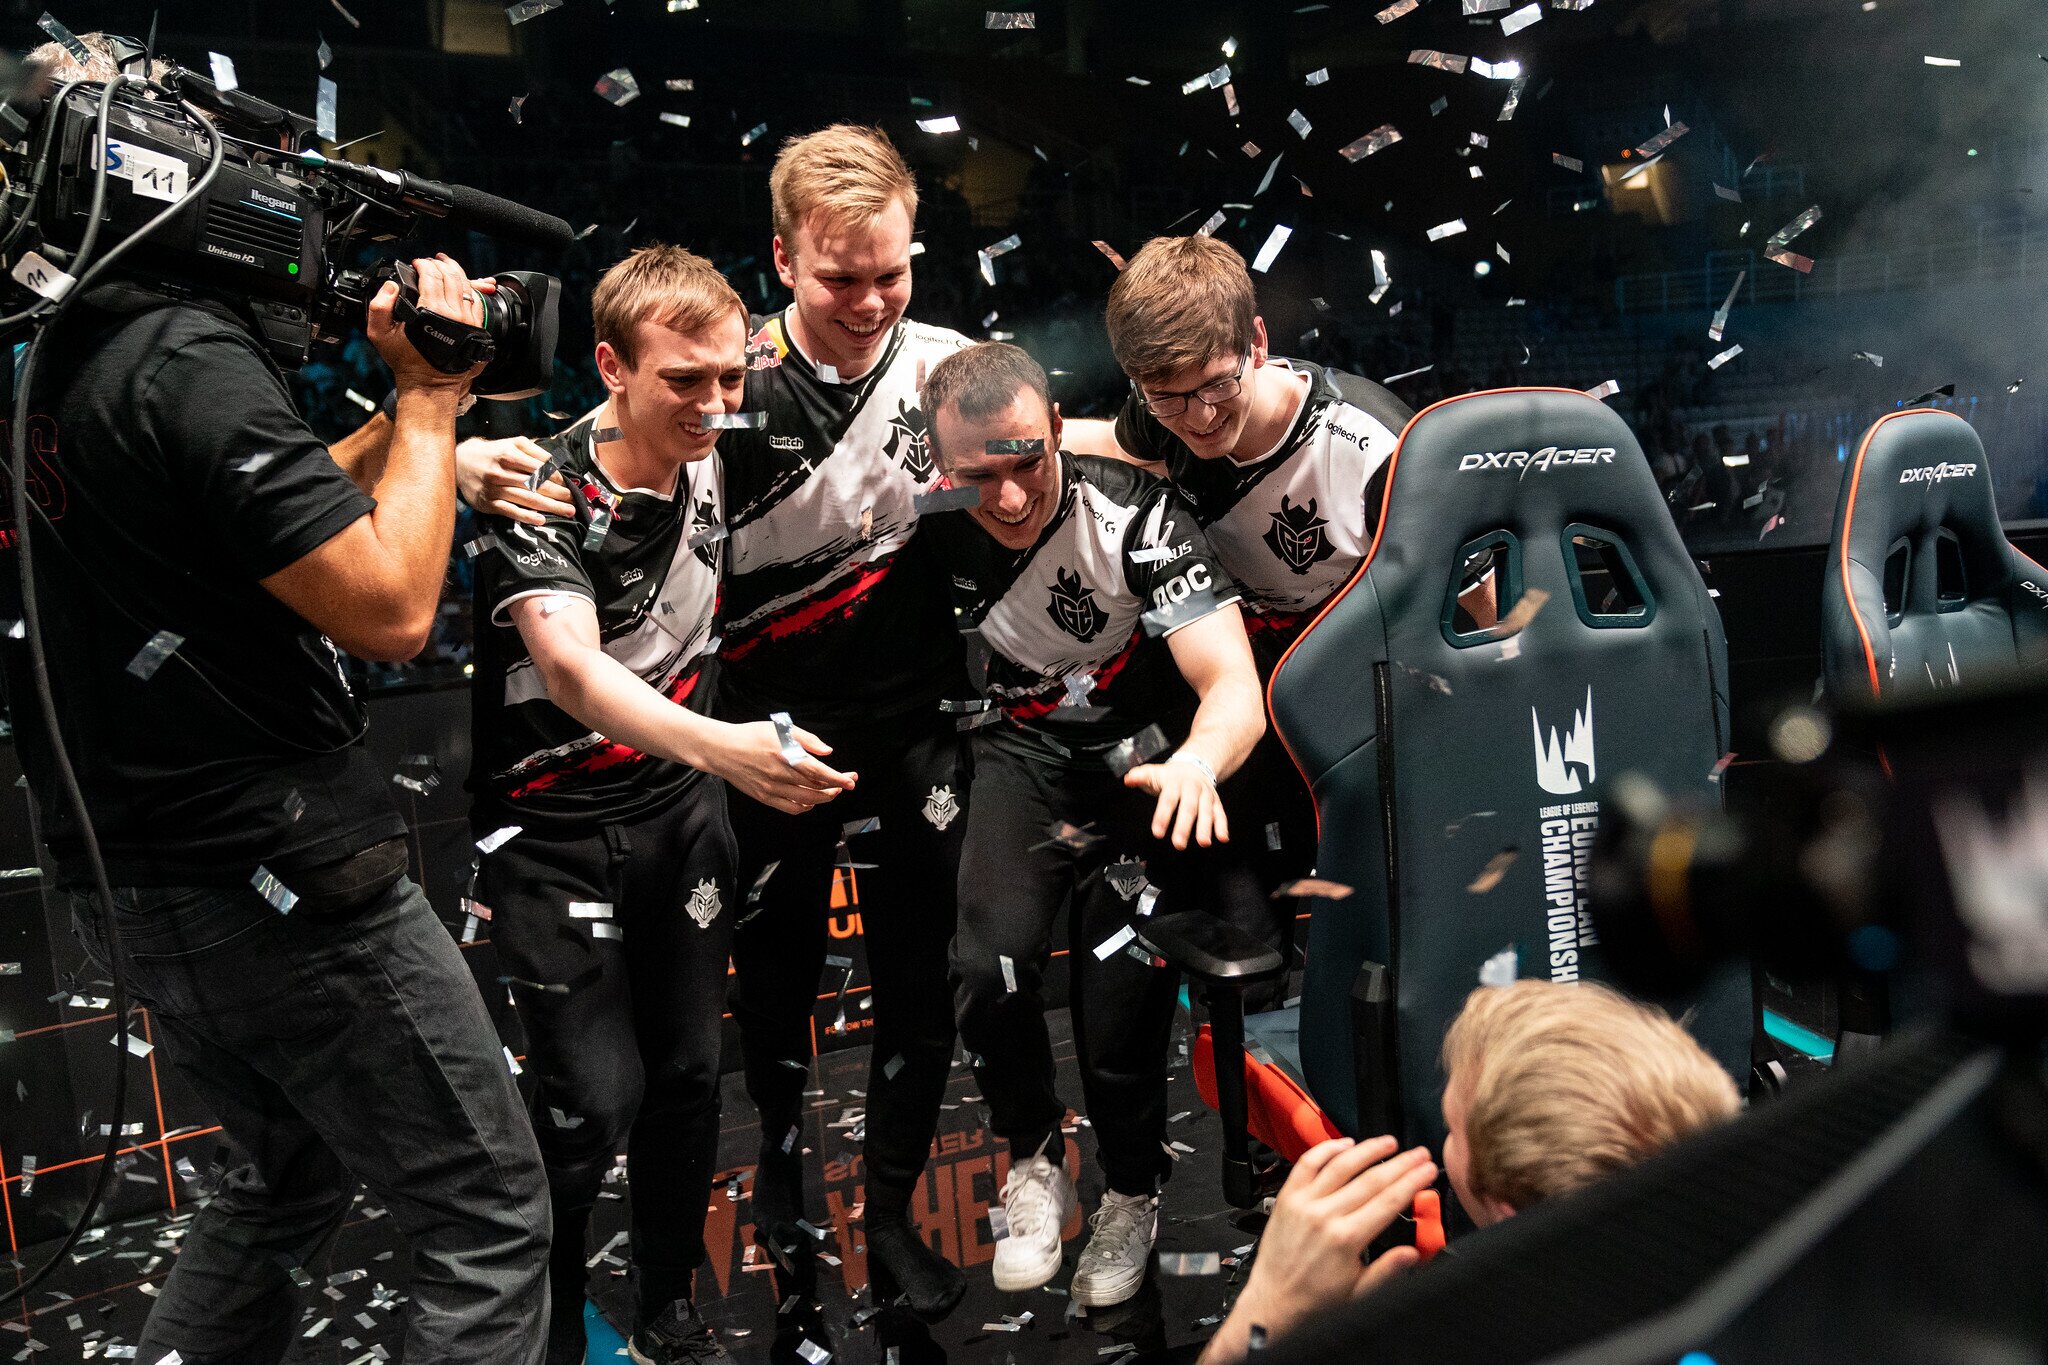 After securing back-to-back LEC championships and an MSI title, the World Championship remains as the final stop on G2’s journey for greatness. (Photo via Riot Games)